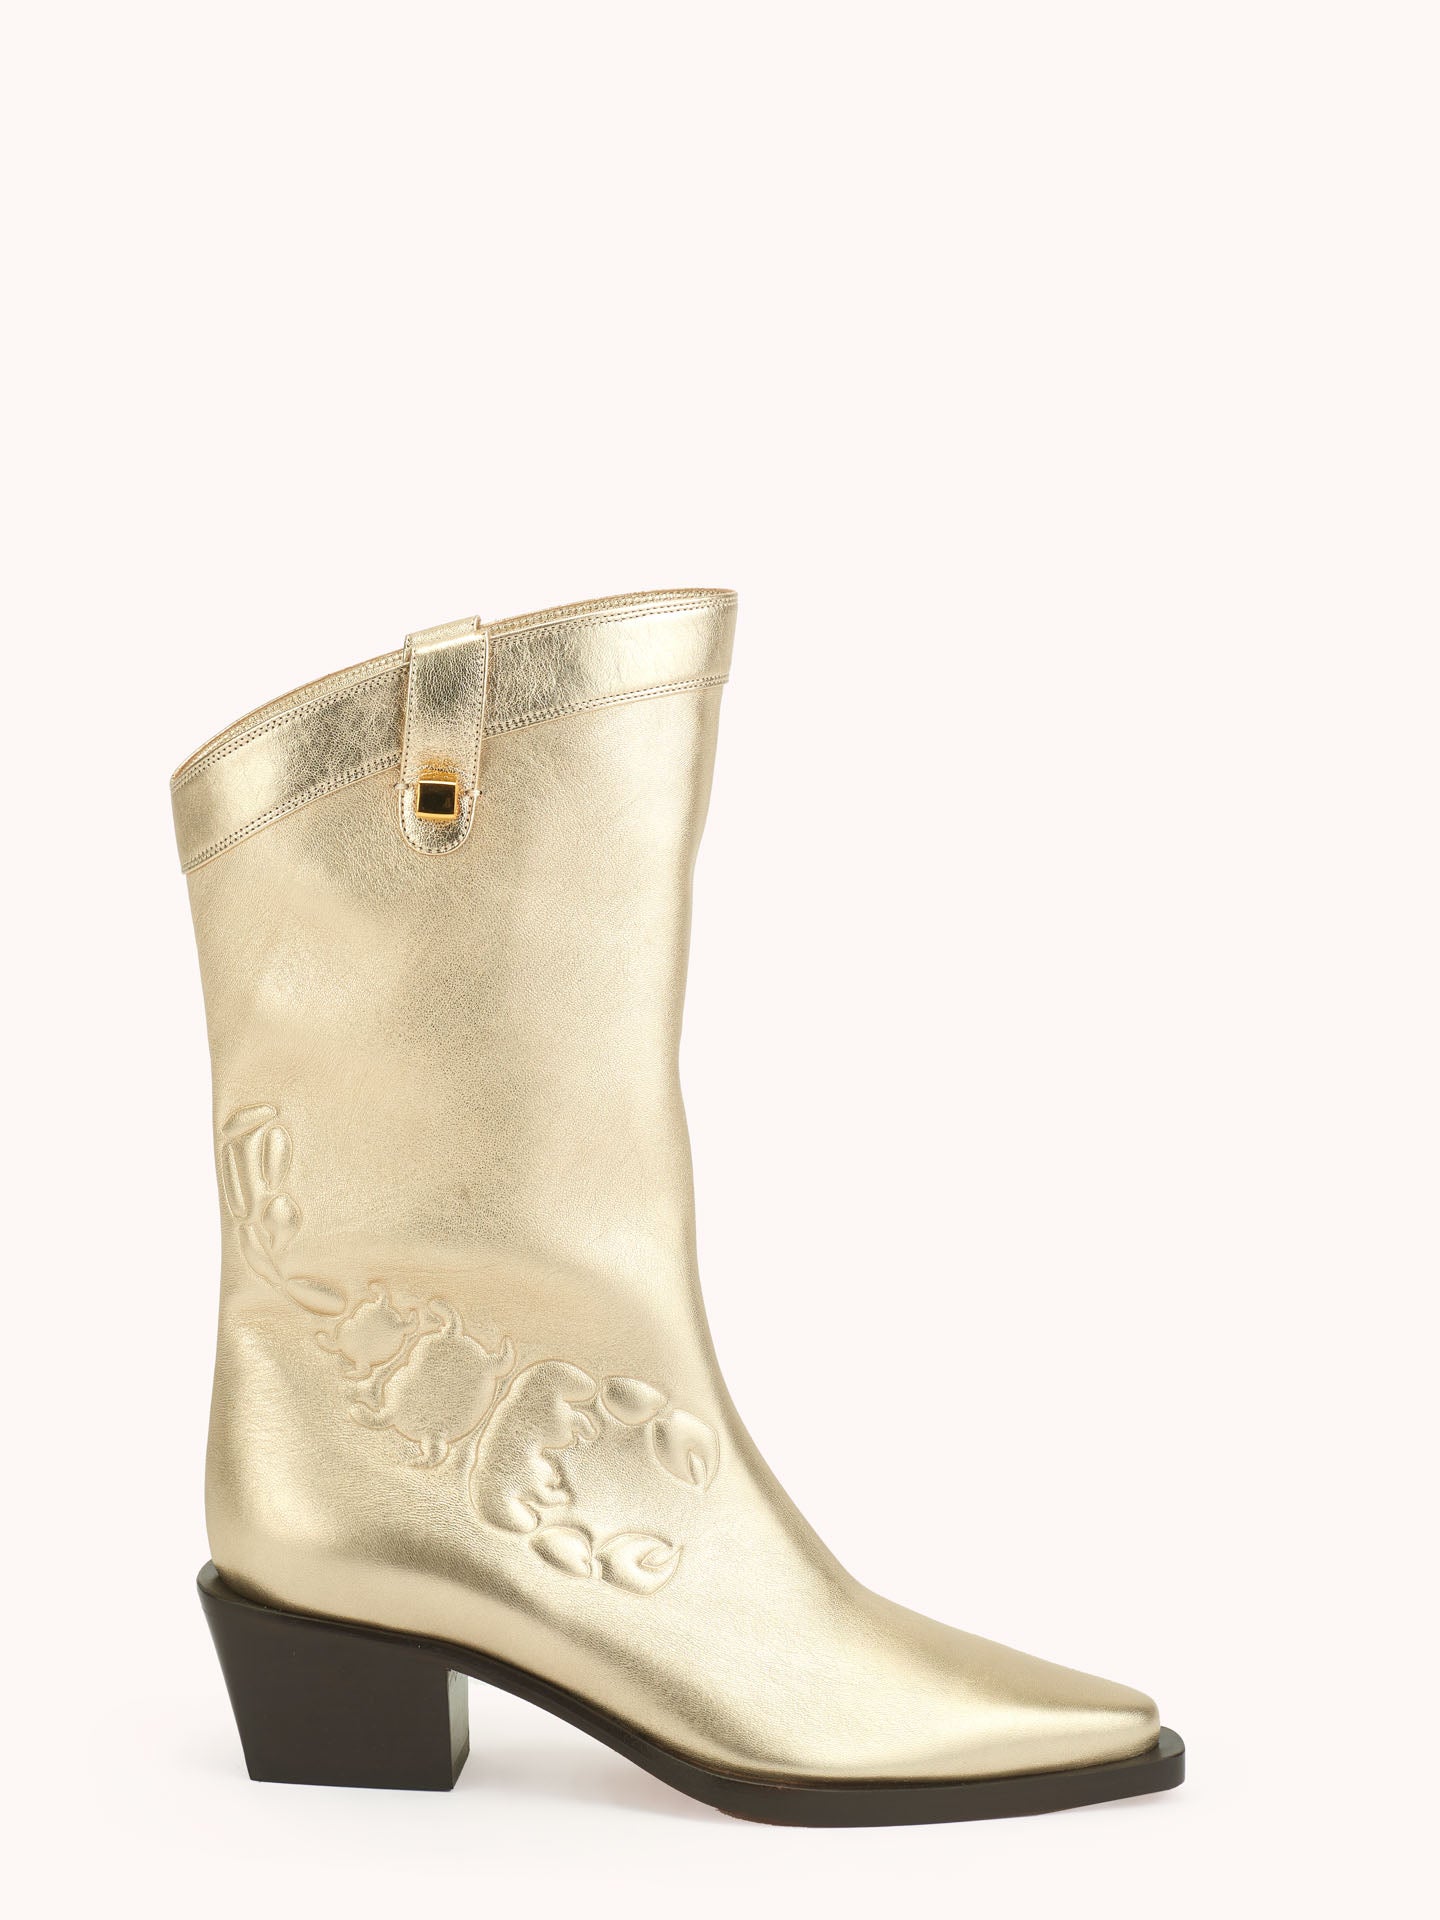 Sienna Gold Nappa Leather Western Boots